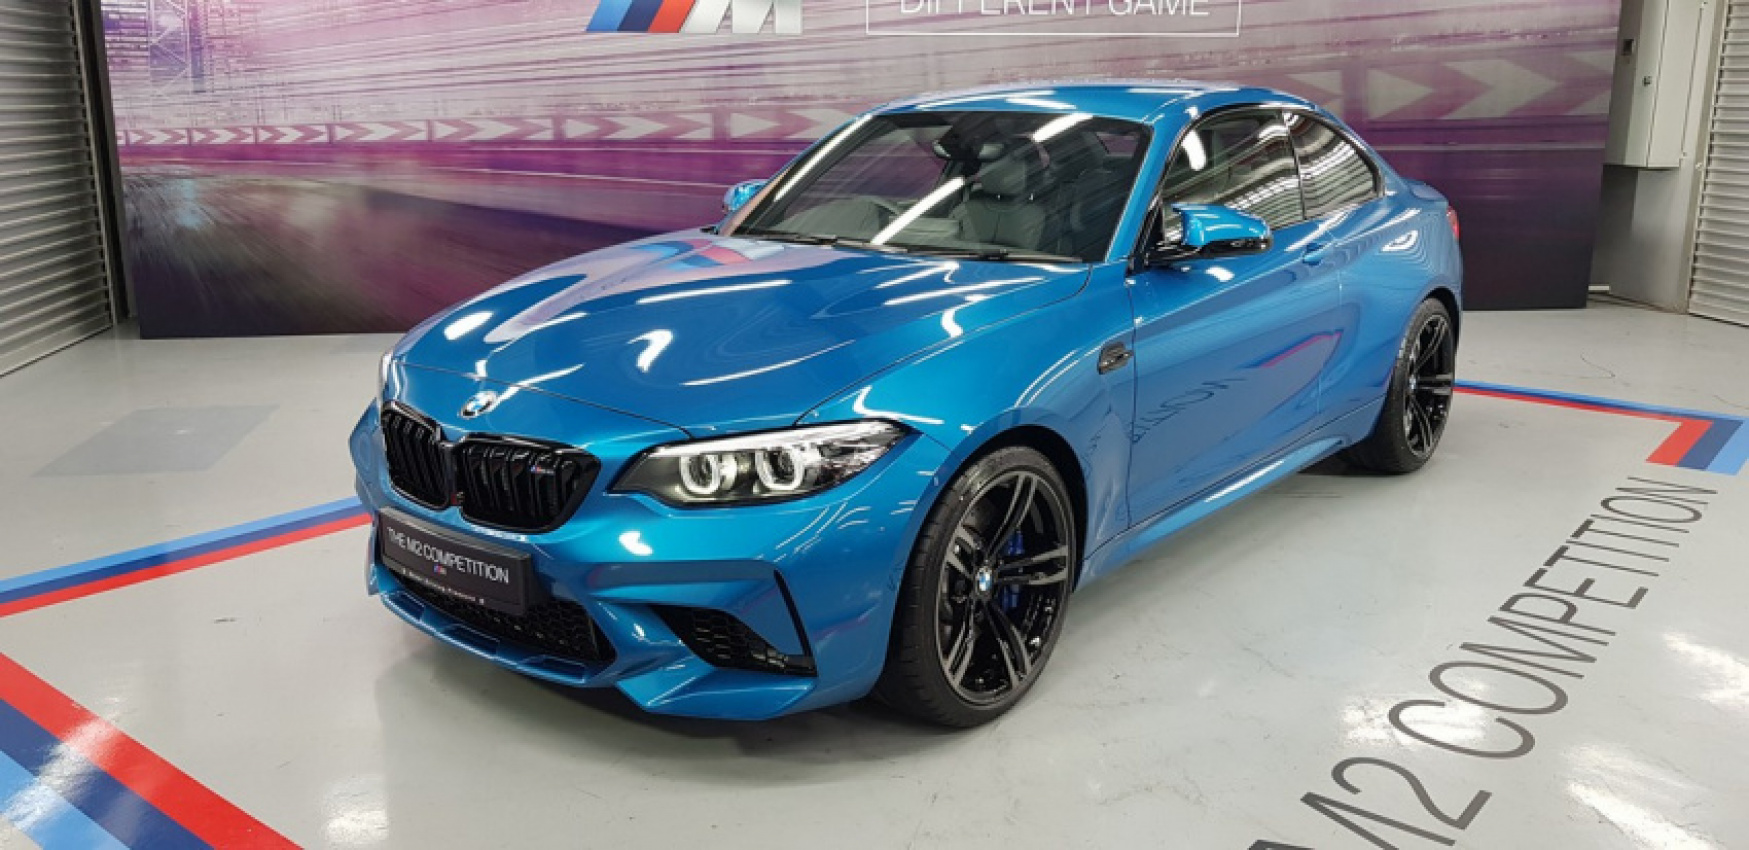 autos, bmw, car brands, cars, automotive, bmw group malaysia, bmw m, bmw m2, bmw malaysia, coupe, malaysia, race track, sepang, sepang international circuit, sports car, sports coupe, bmw m2 competition launched and tested at sic